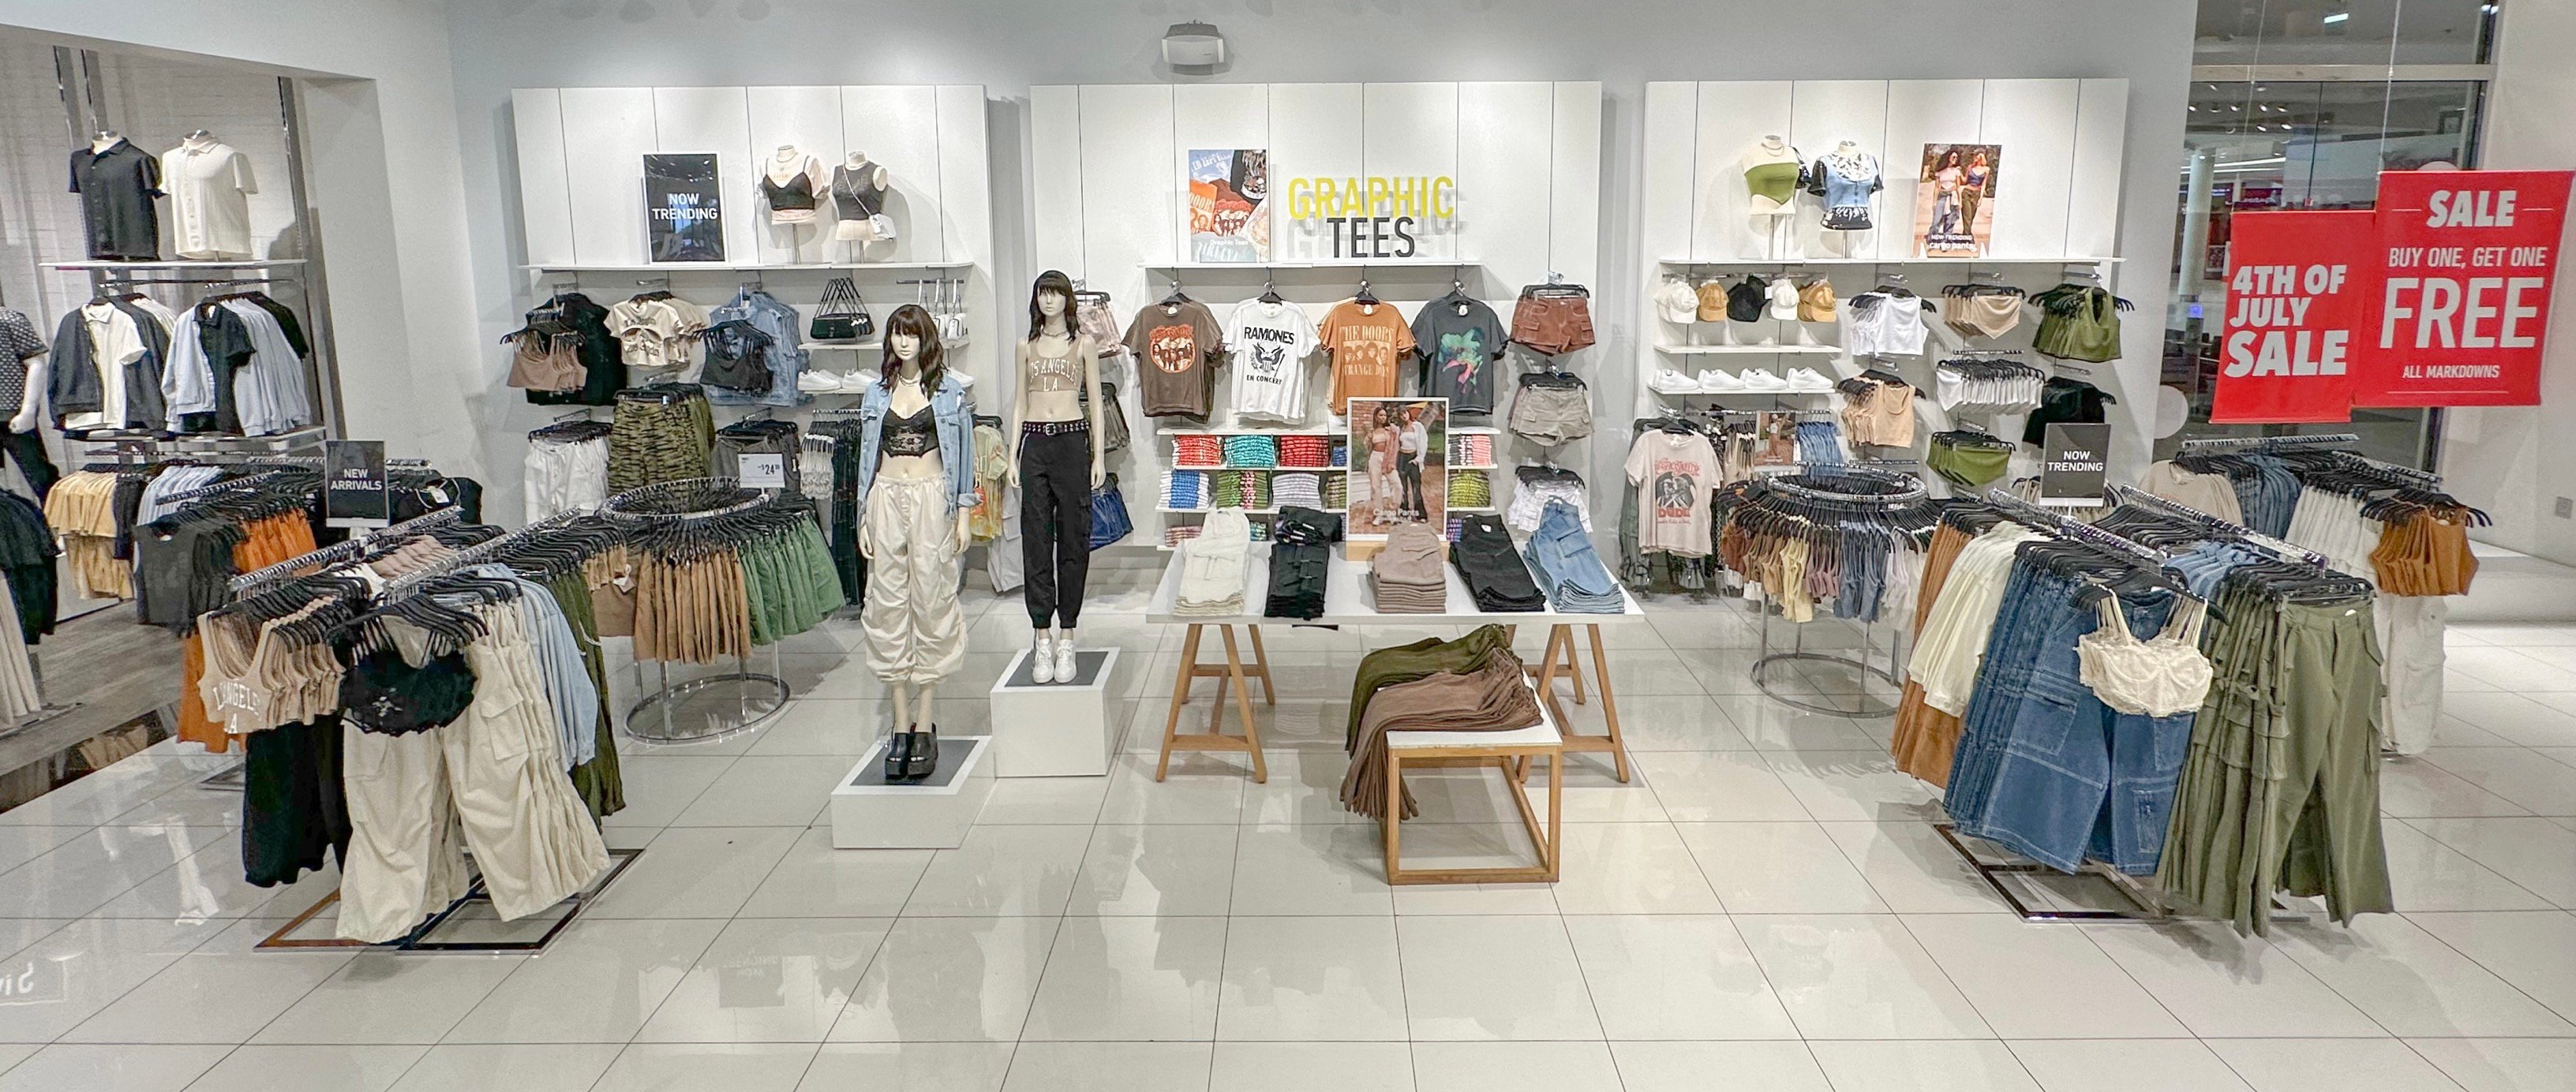 Forever 21 Stores Dallas - Clothing store ※2023 TOP 10※ near me